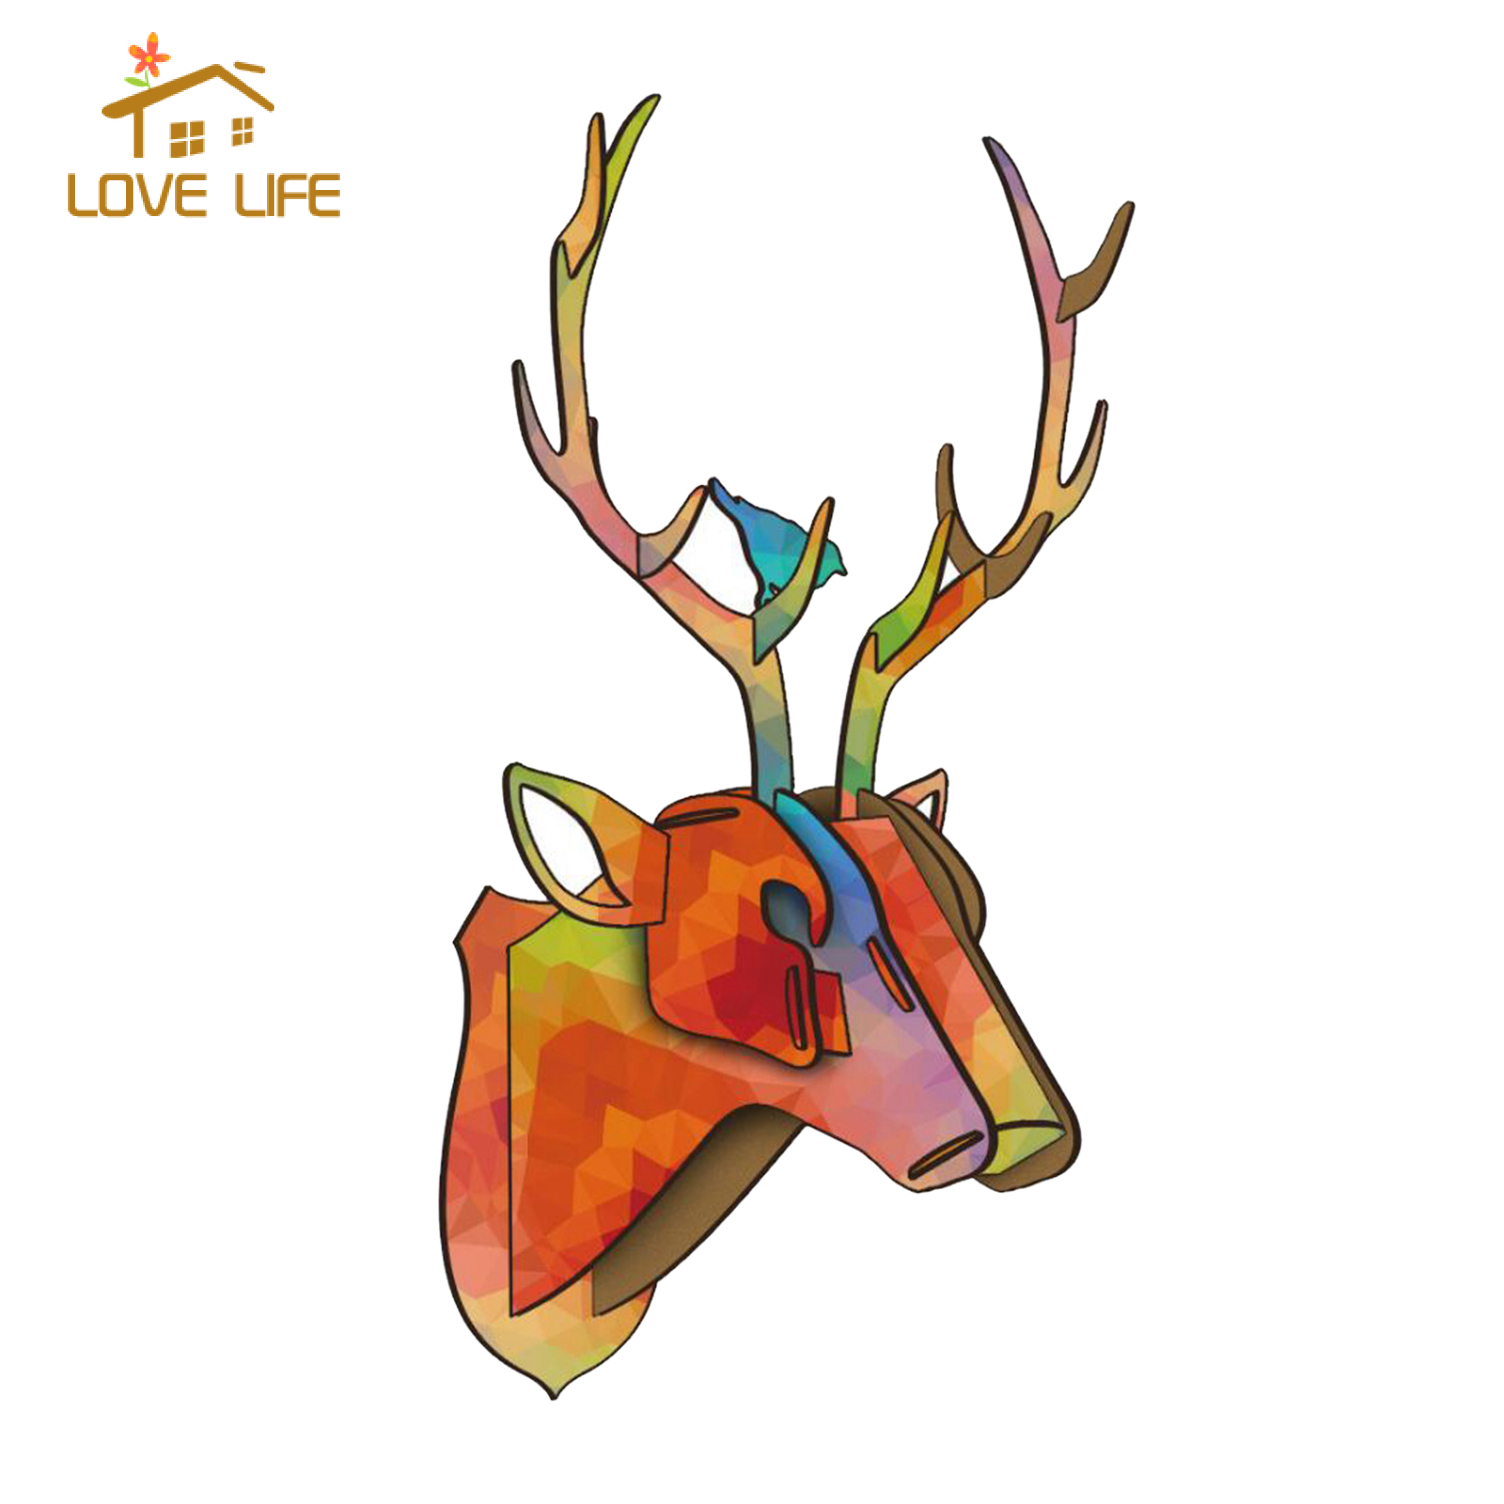 [whfashion]3D Puzzle Trophy Animal Head Wall Deer Sculpture Art for Office Home Decor A